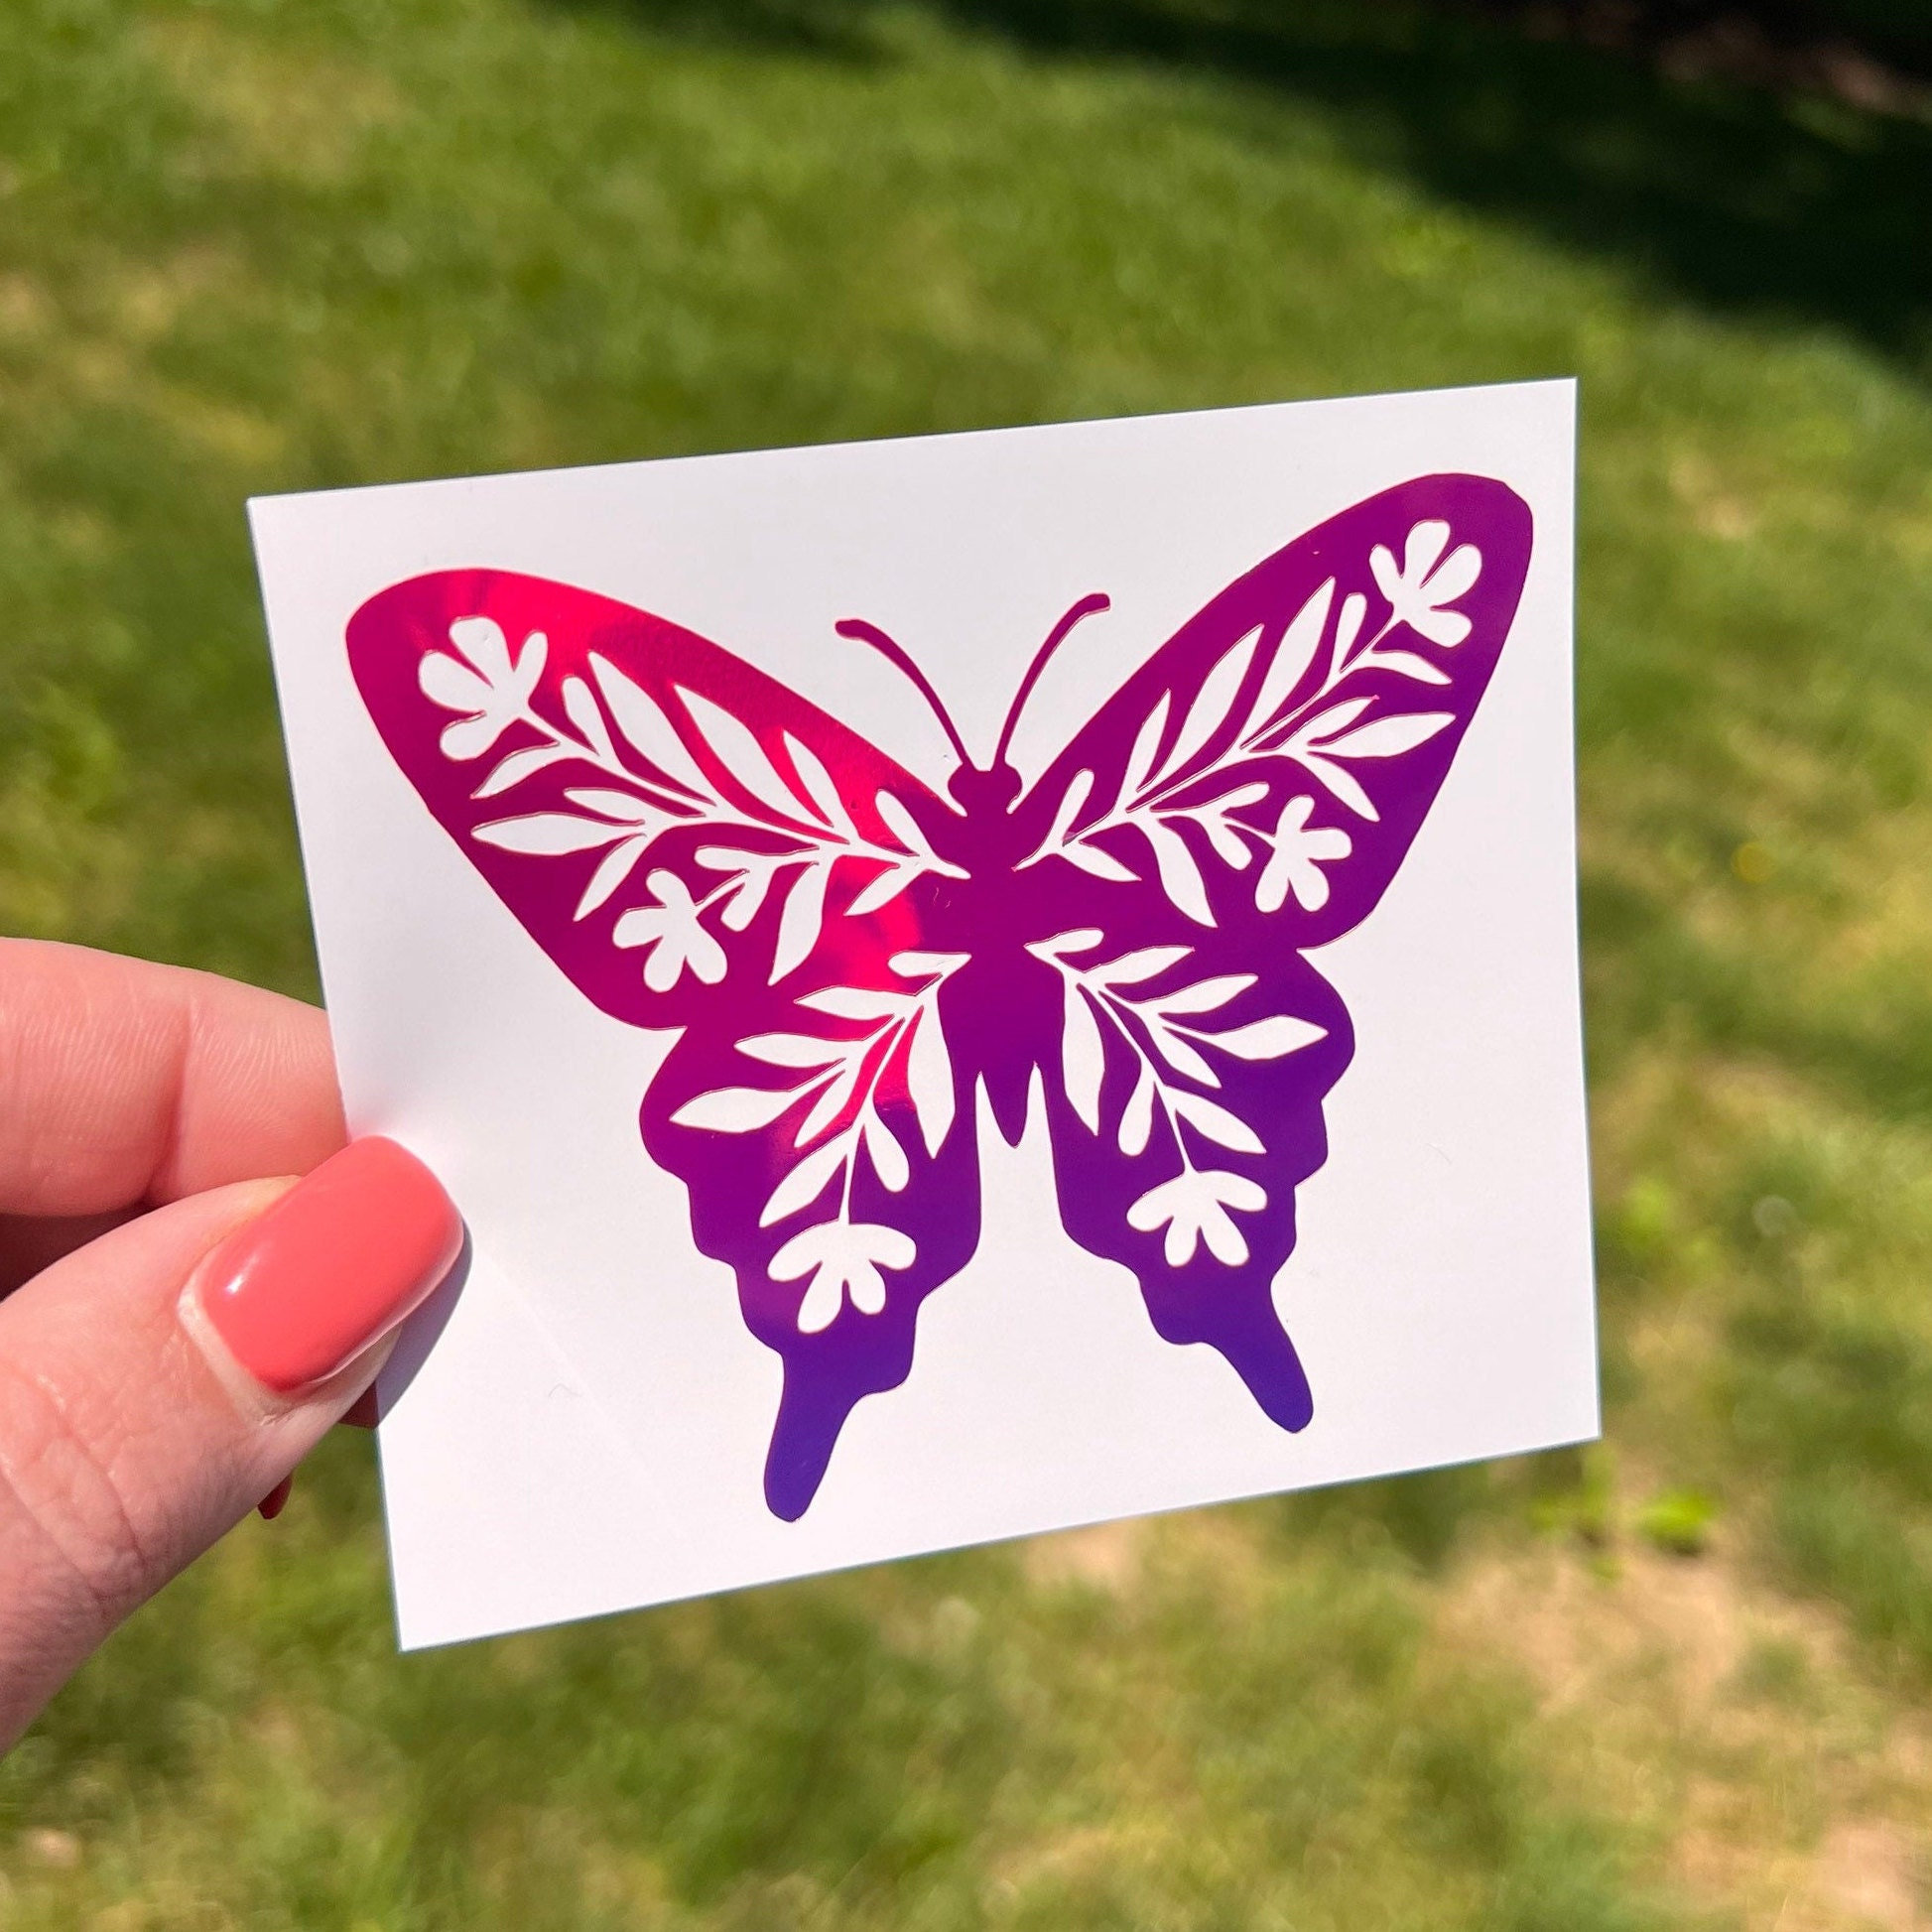 Butterfly Decals, Car Window Stickers, Car Accessories, Butterfly Sticker,  Car Decal